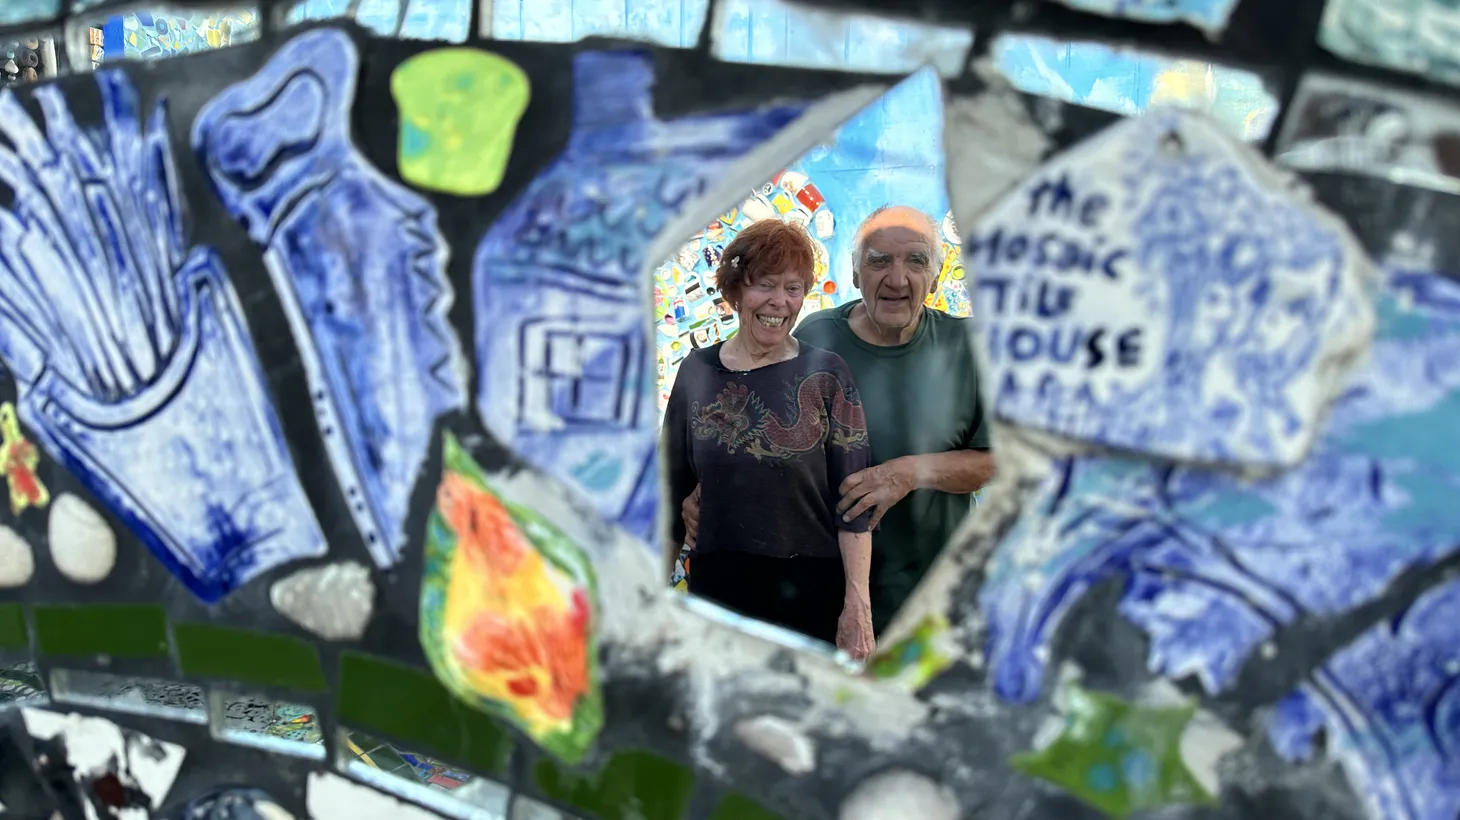 Cheri Pann and Gonzalo Duran stand reflected in the mosaic mirrors plastering the garden wall of the home the pair have decorated inside and out with mosaic tile art and paintings.